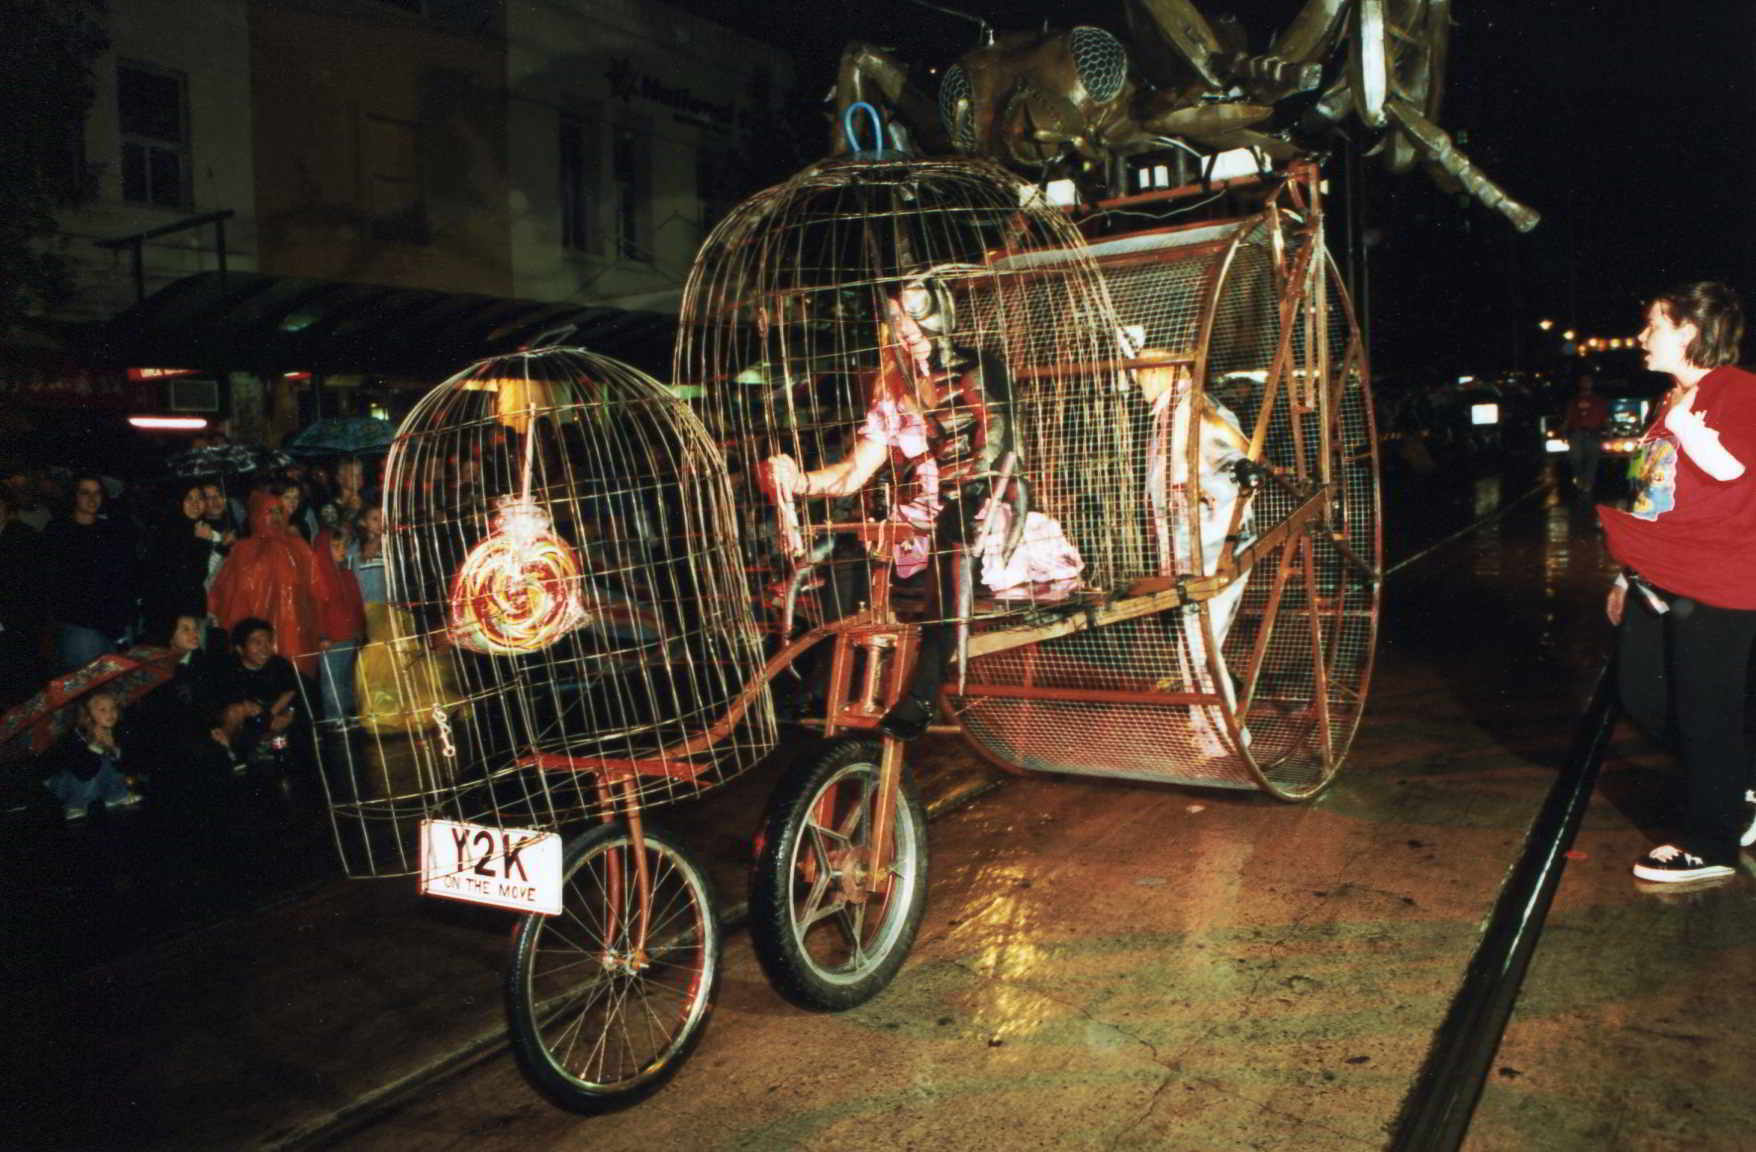 Road Roach's 3 cage parade contraption on the street at night